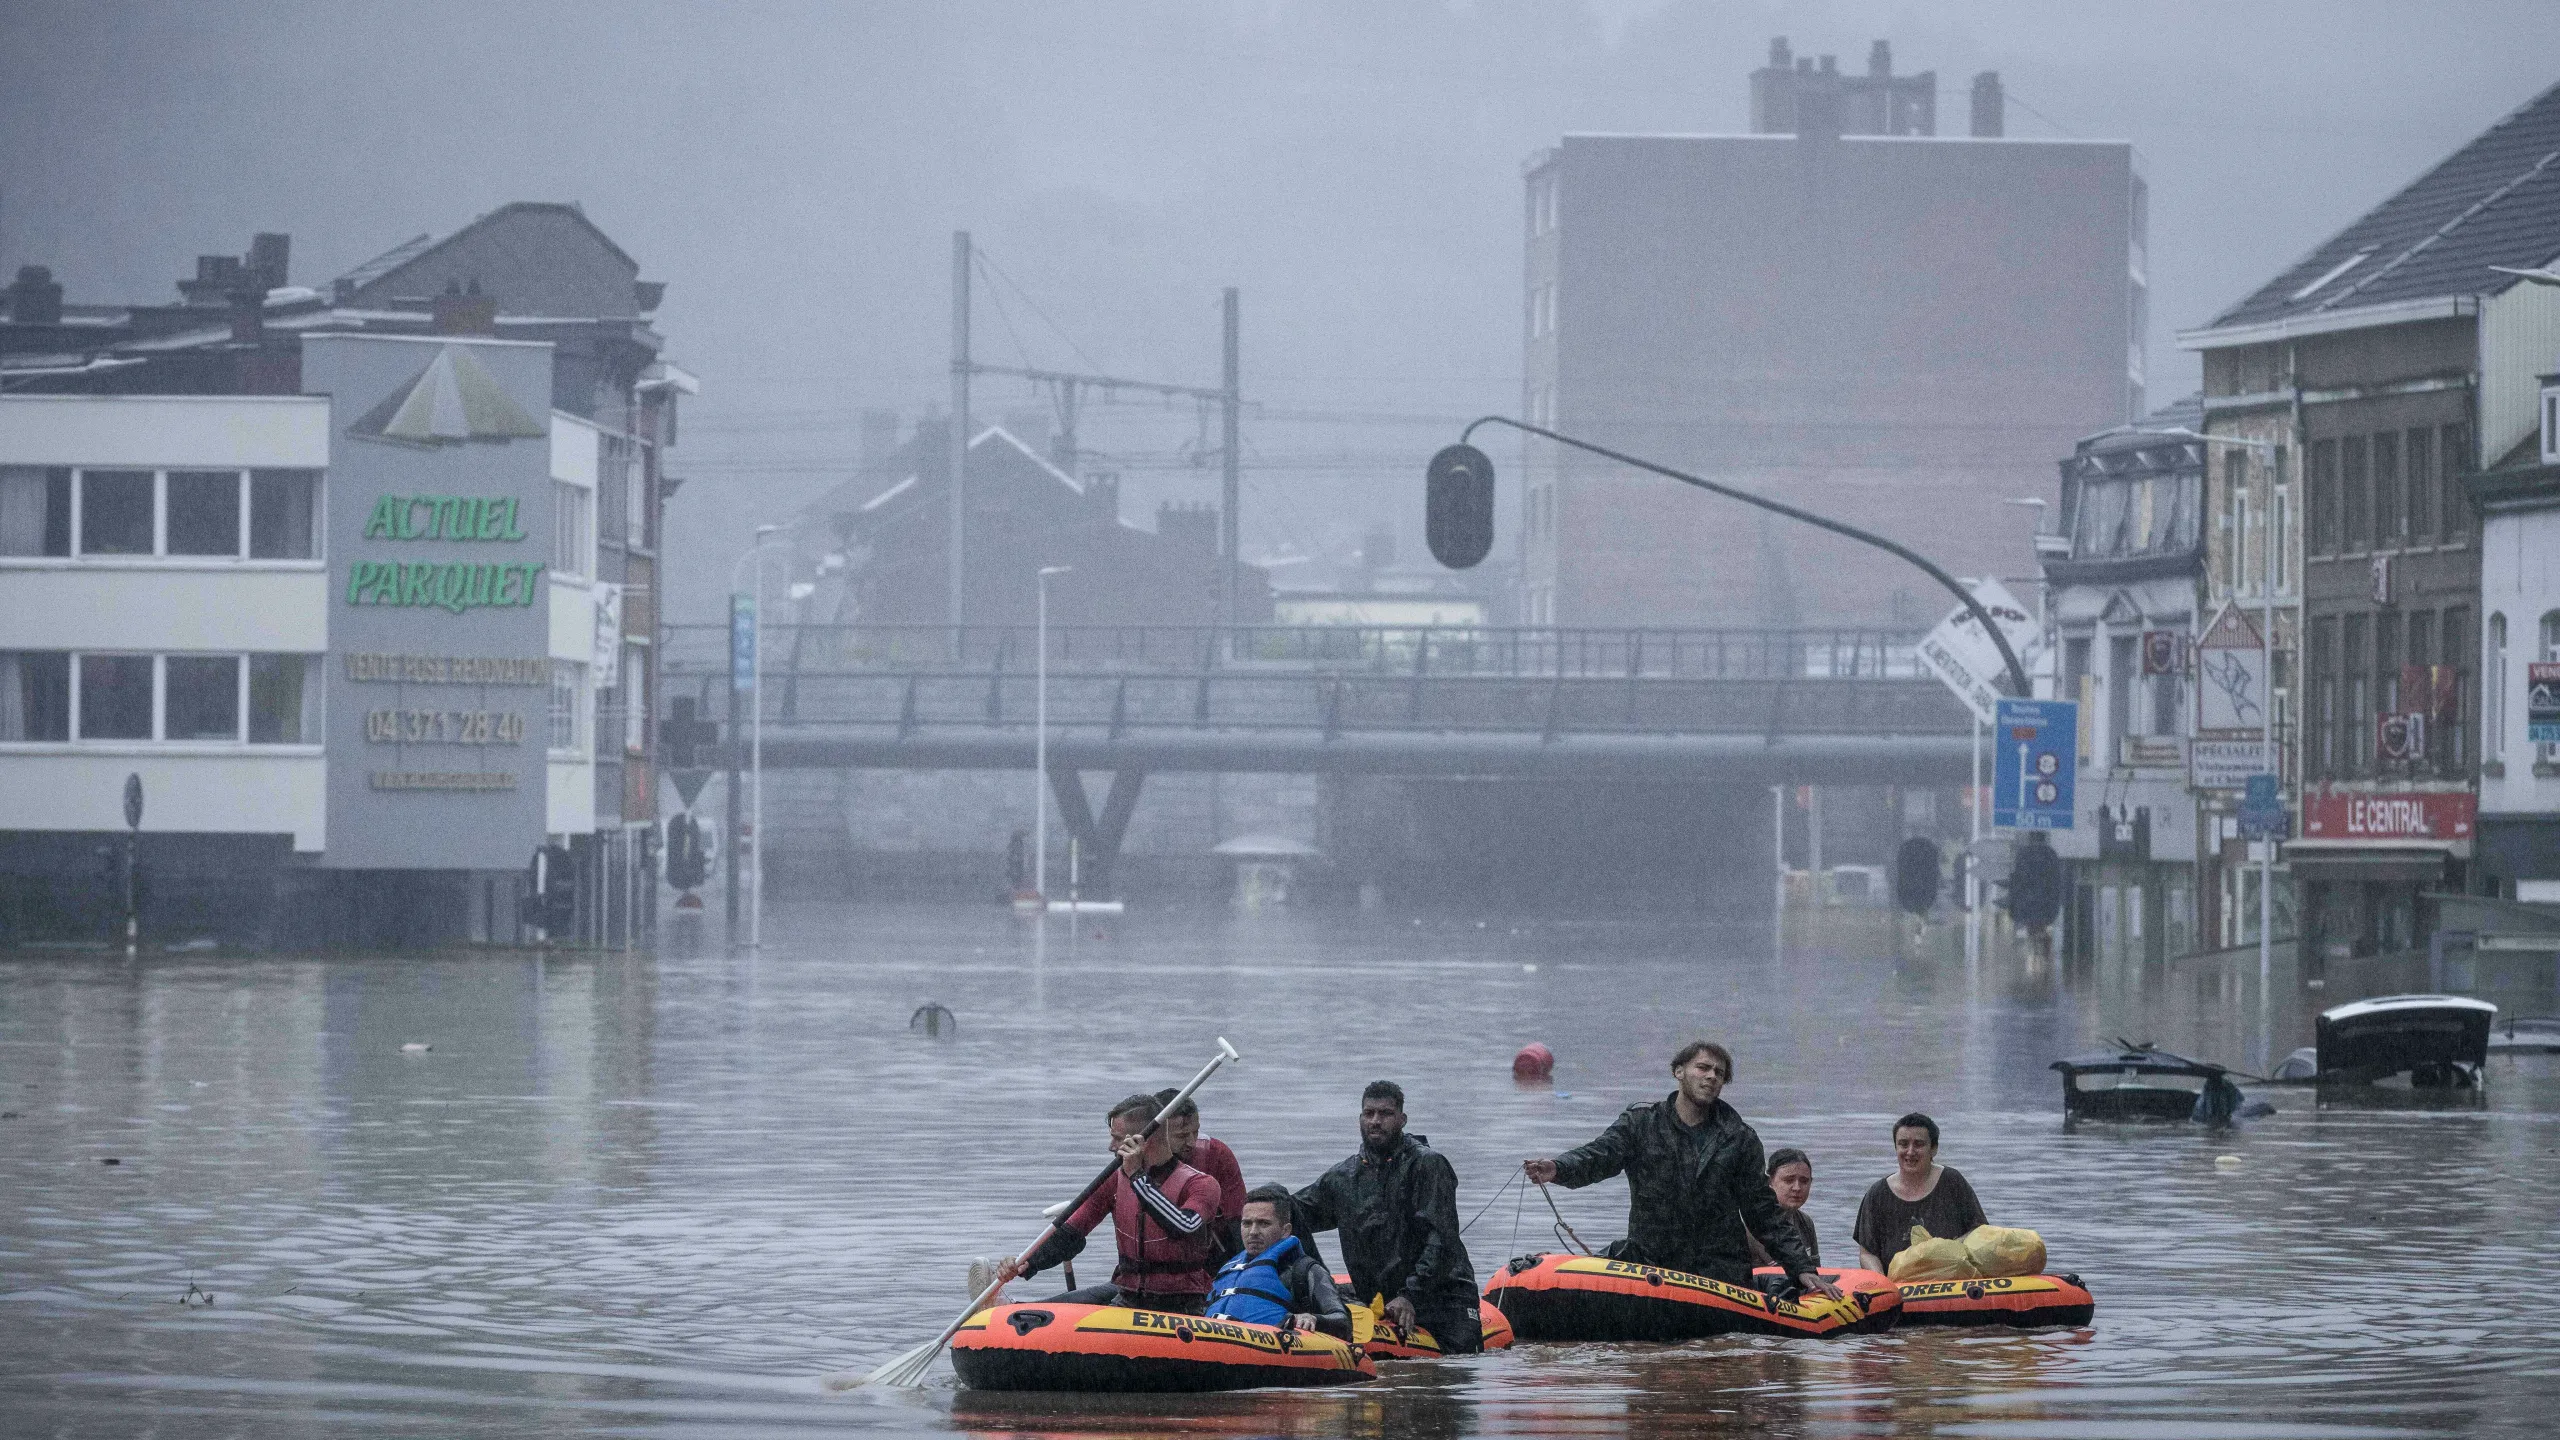 Europe Urgently Needs to Increase Its Disaster and Climate Change Resilience